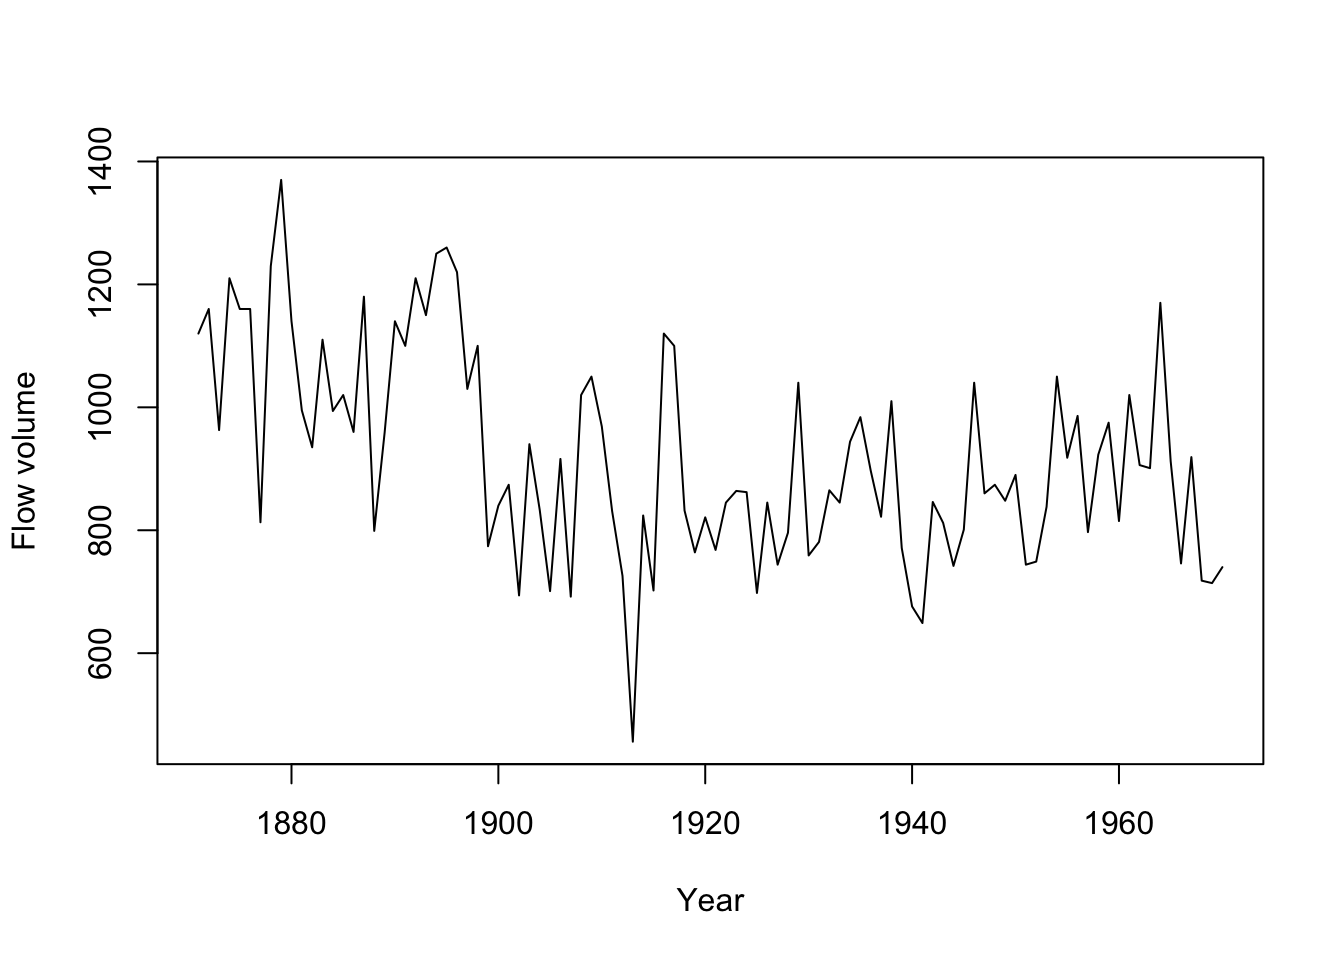 The Nile River flow volume 1871 to 1970 (Nile dataset in R).